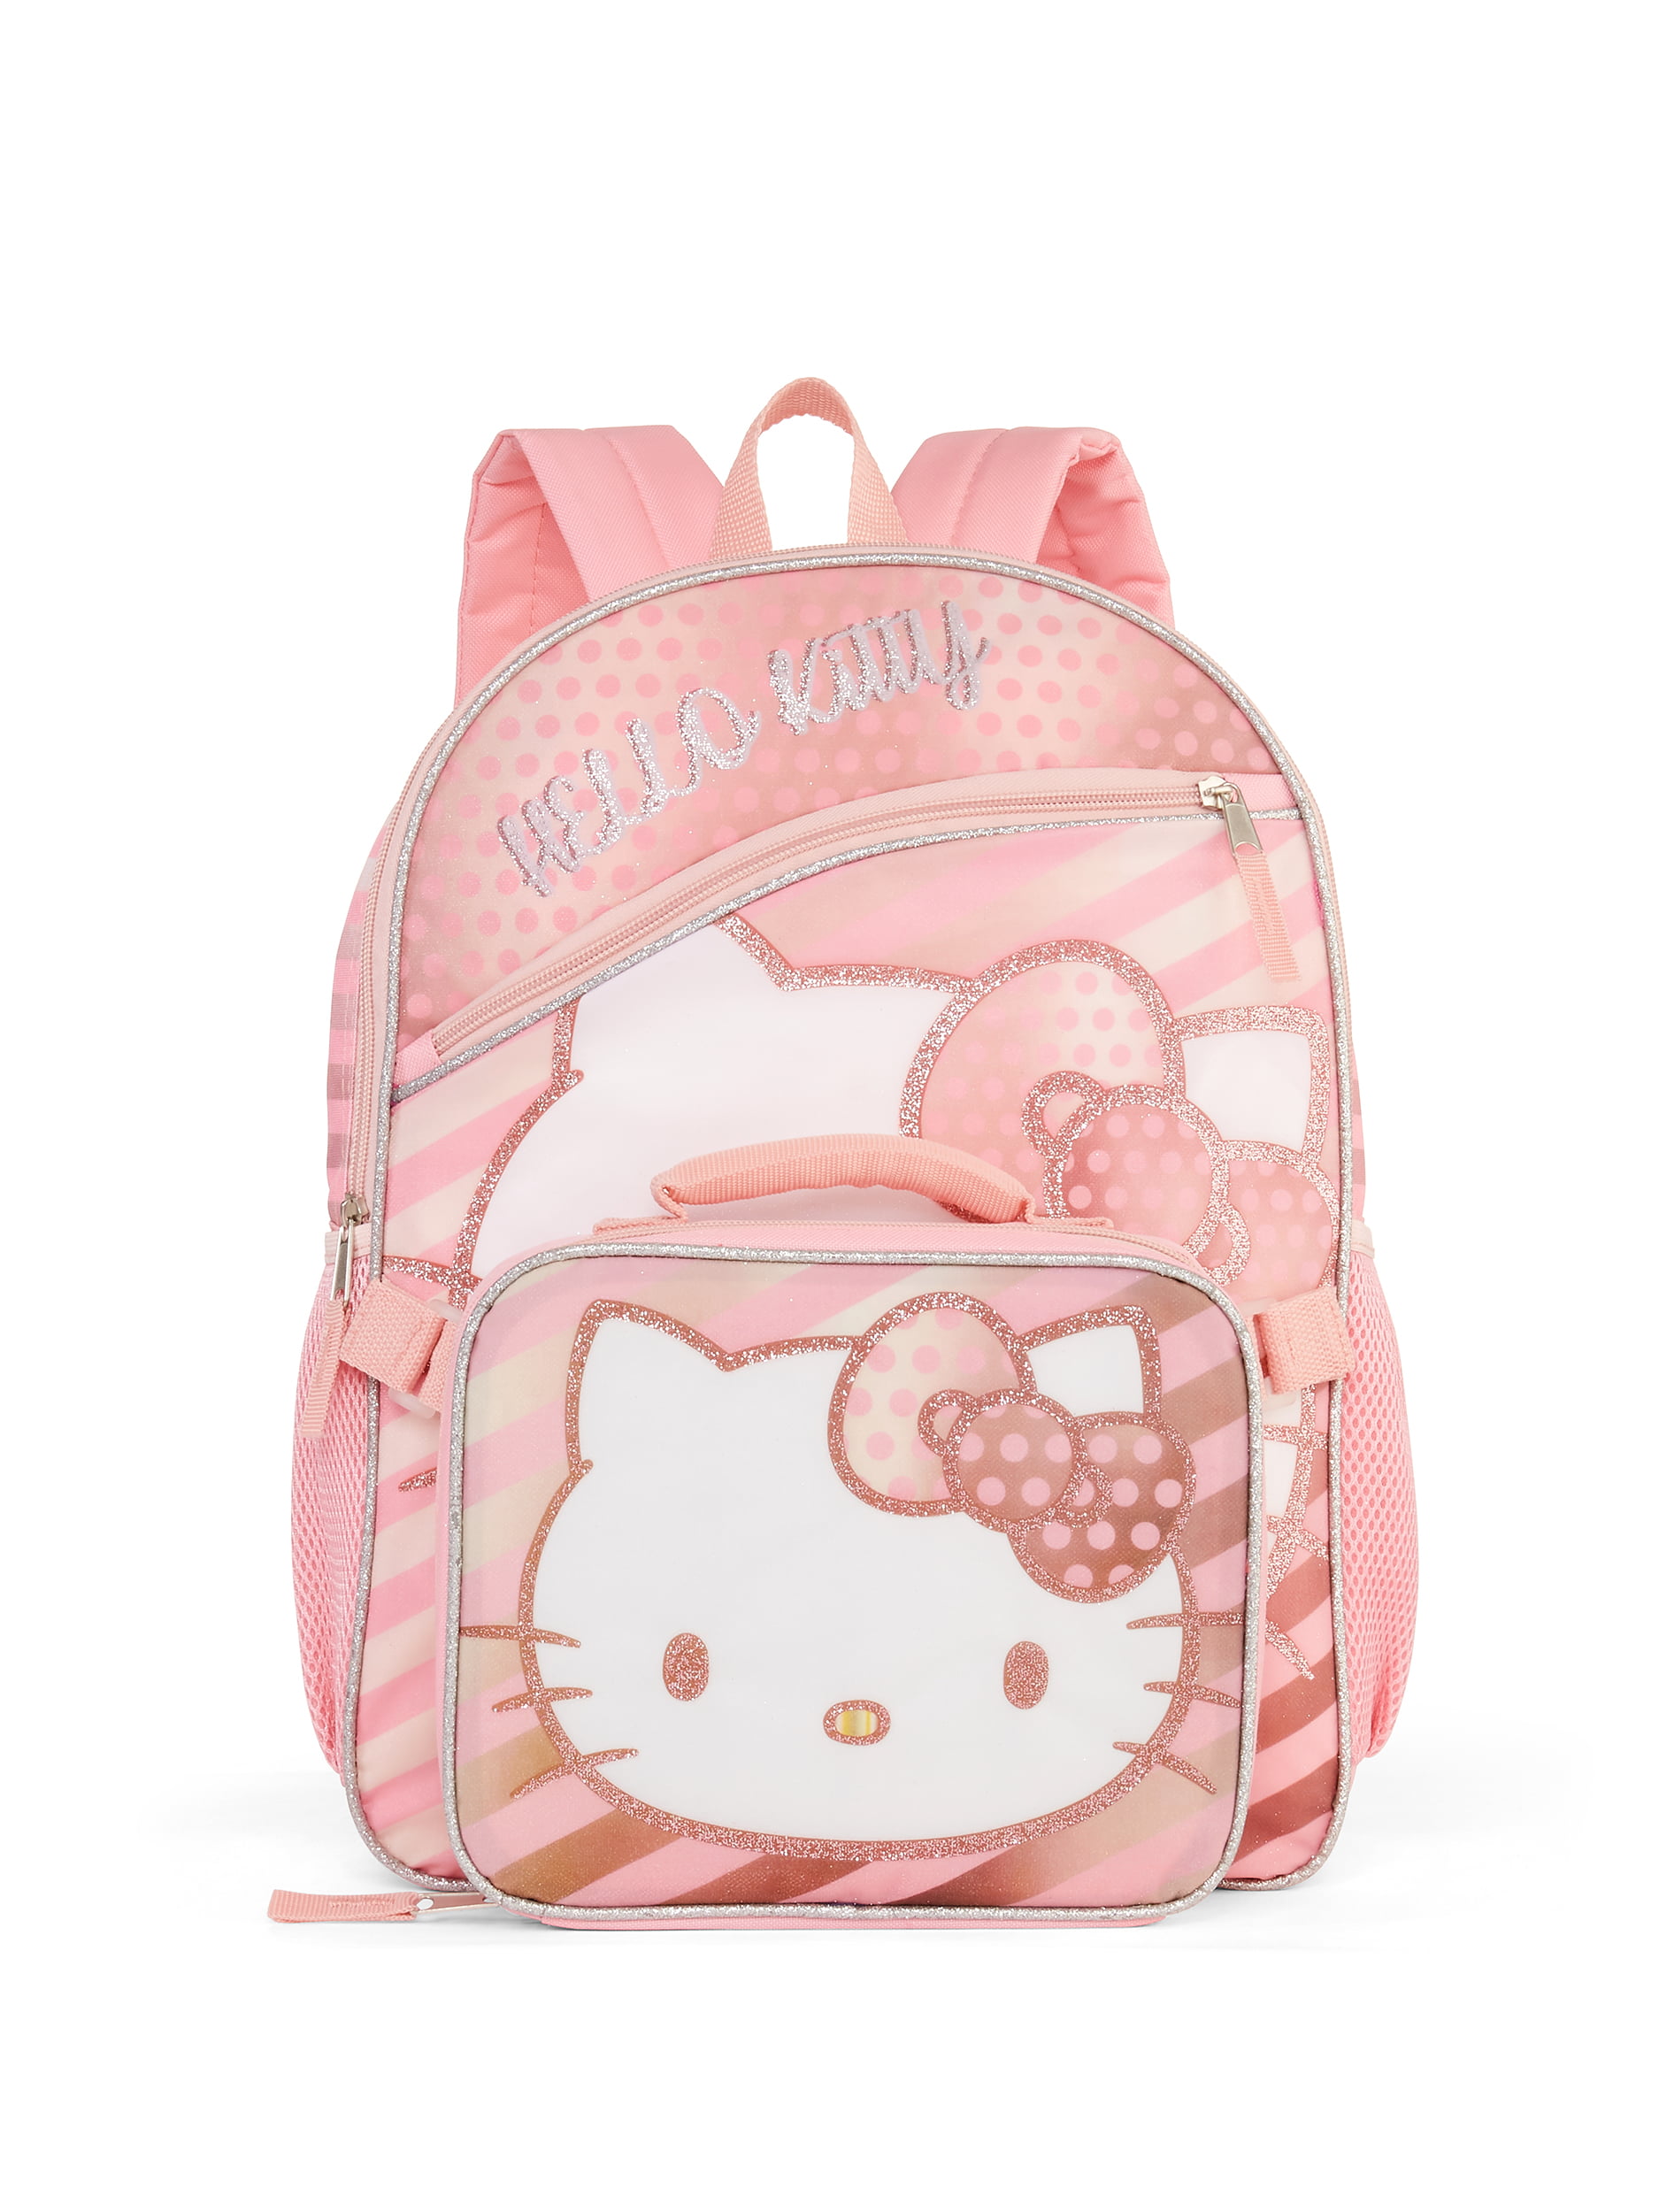 Shop Hello Kitty Print 5-Piece Trolley Backpack Set - 18 Inches